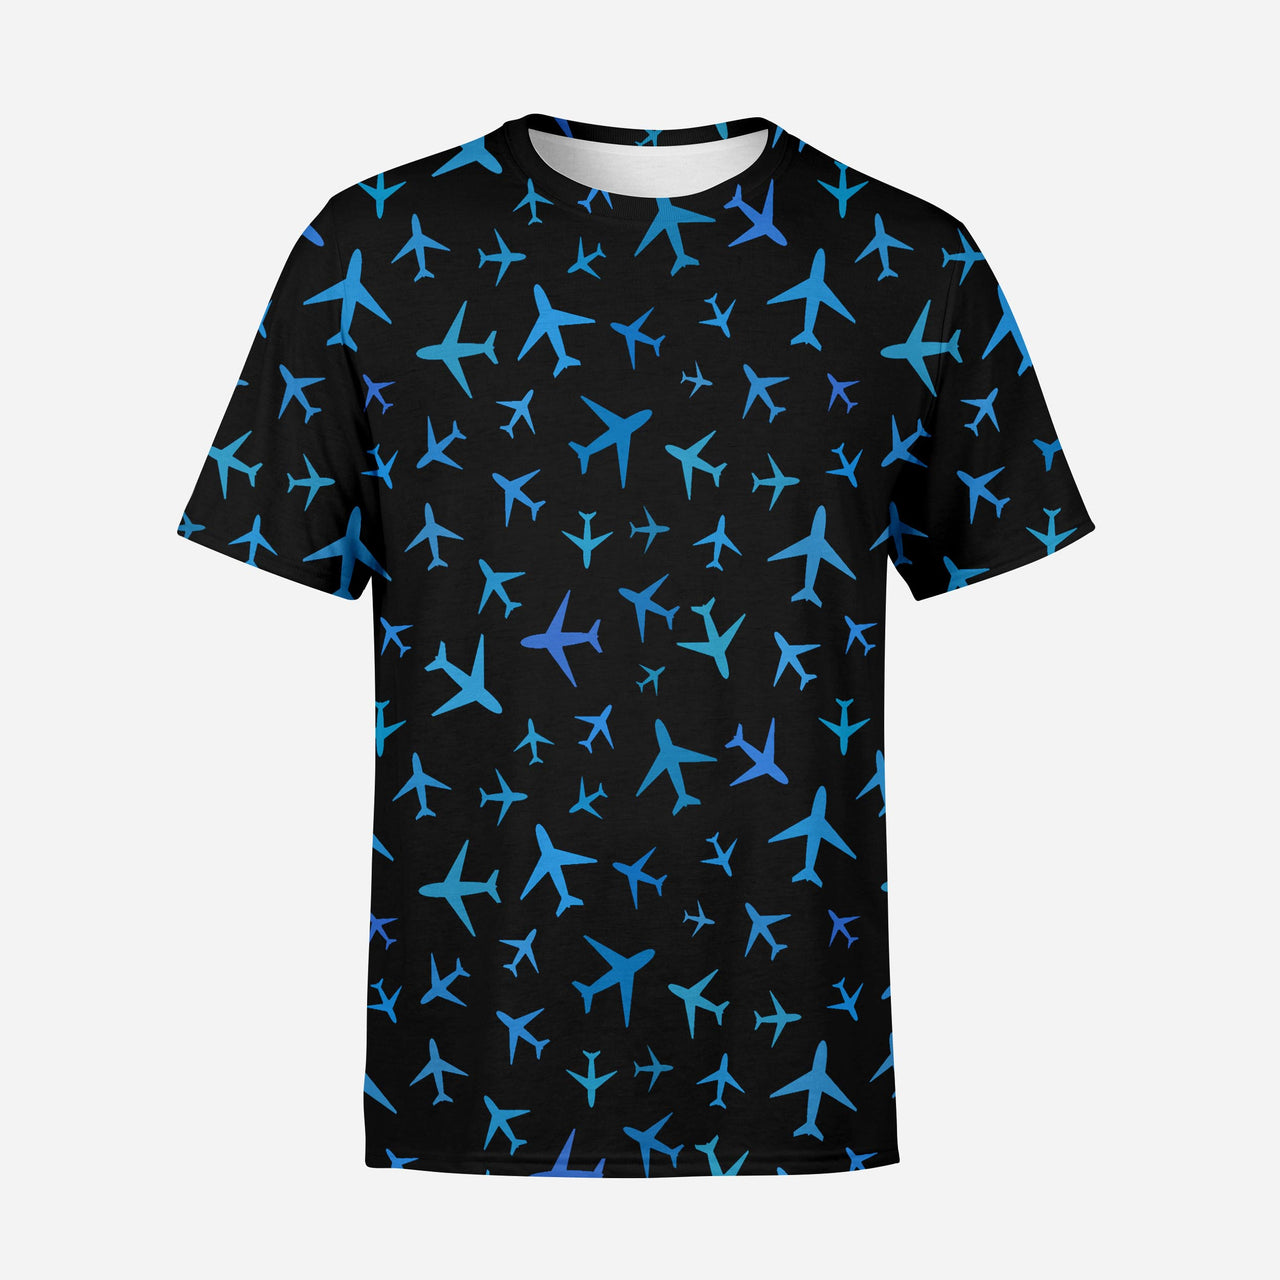 Many Airplanes (Black) Designed 3D T-Shirts